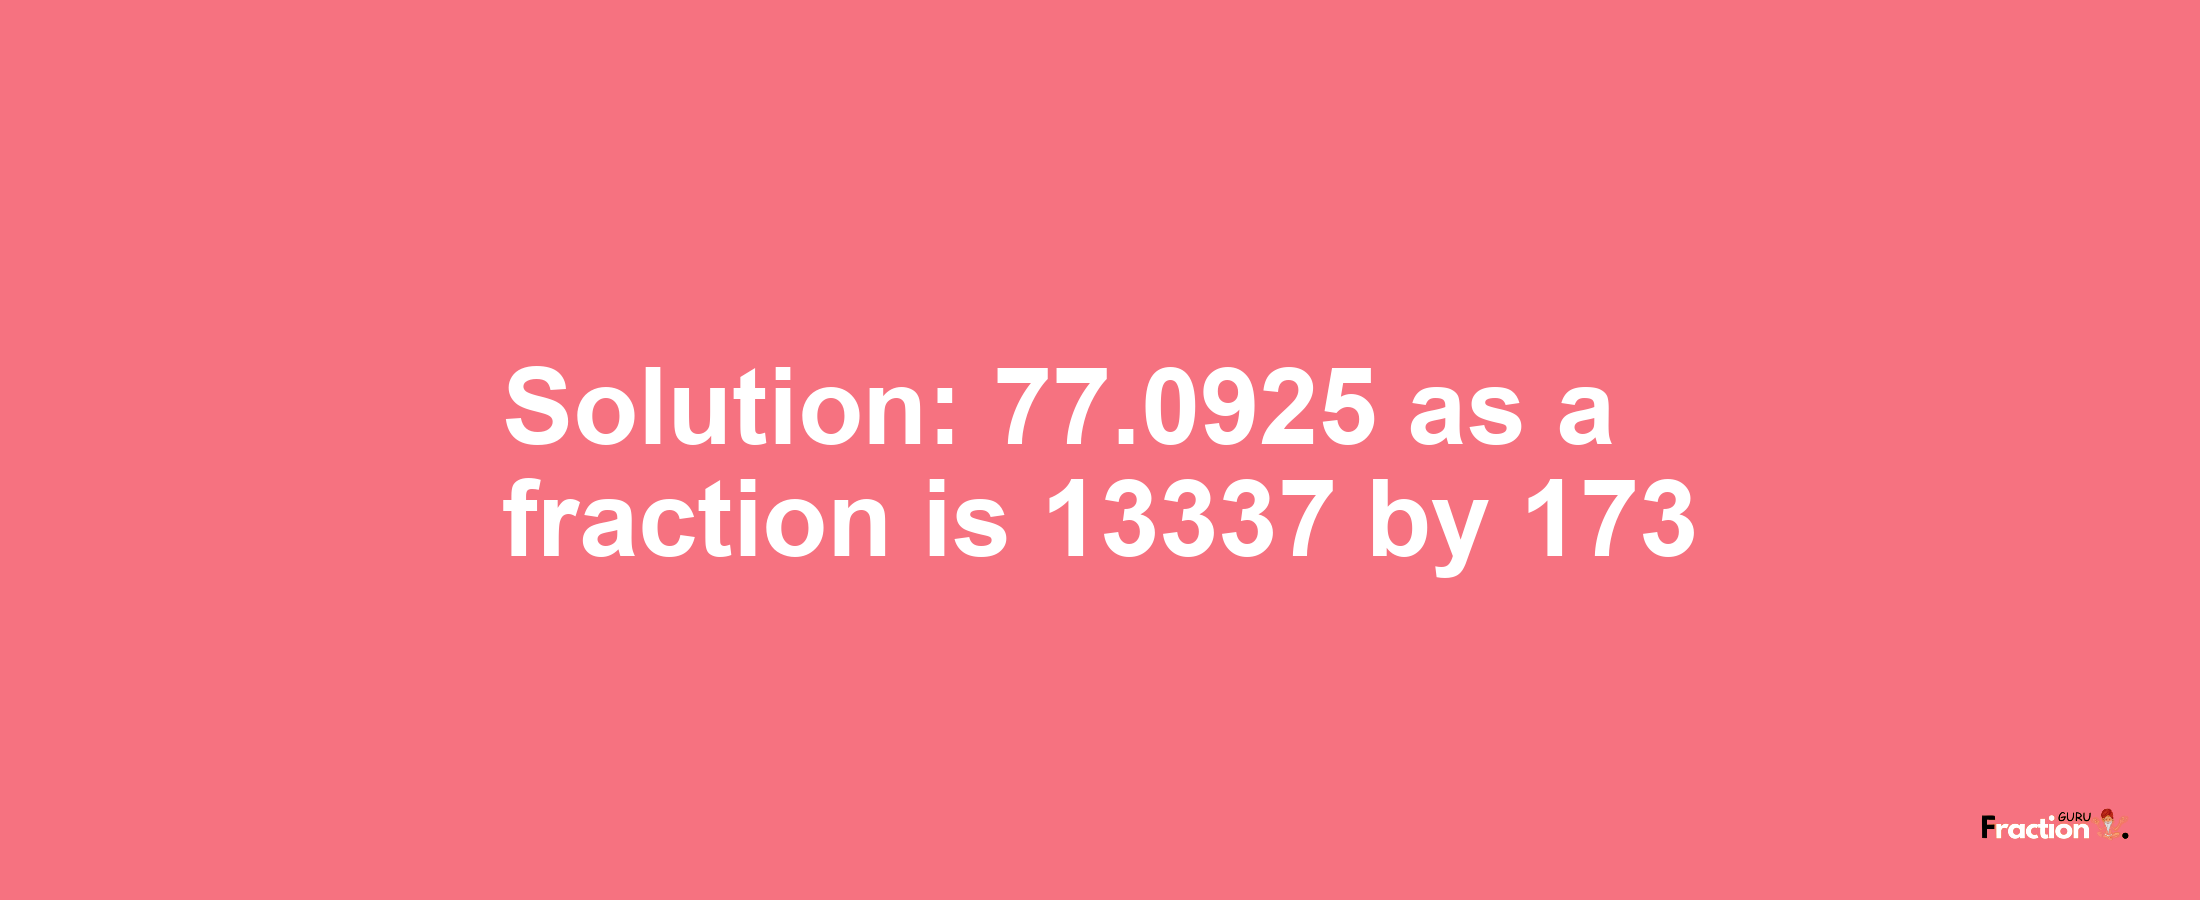 Solution:77.0925 as a fraction is 13337/173